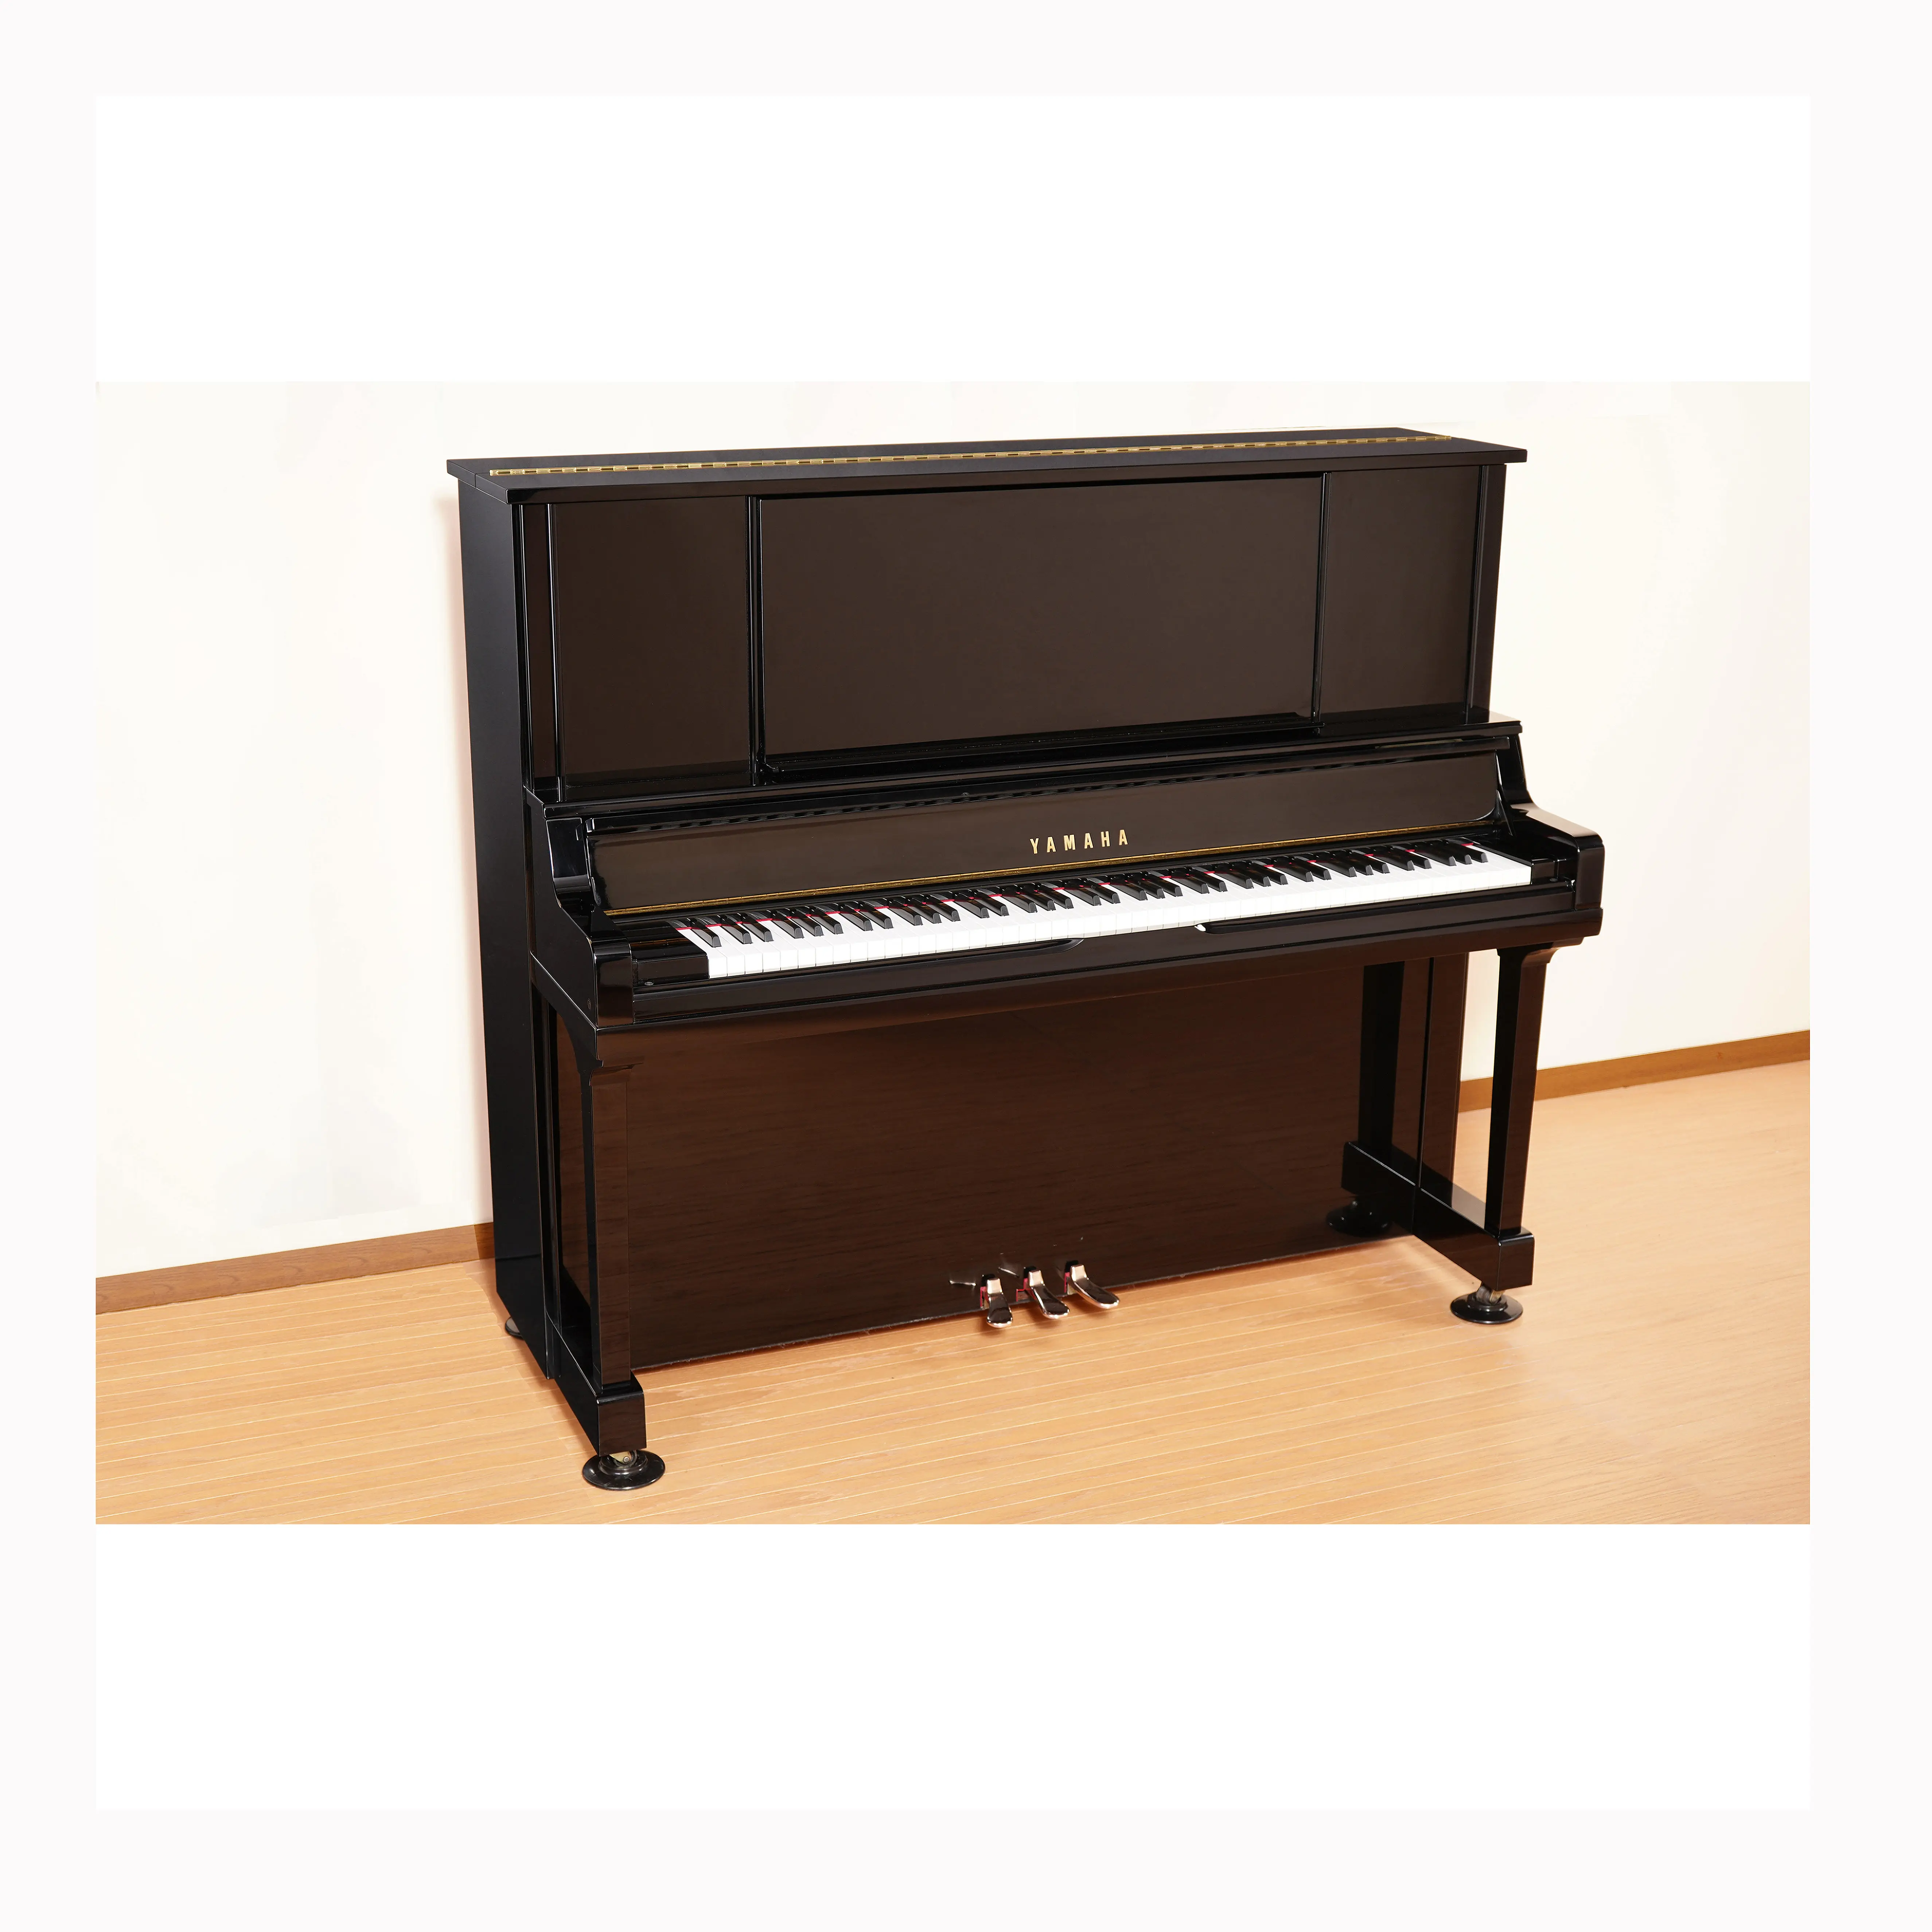 Japan professionnel manufactured by YAMAHA used music instruments piano second hand